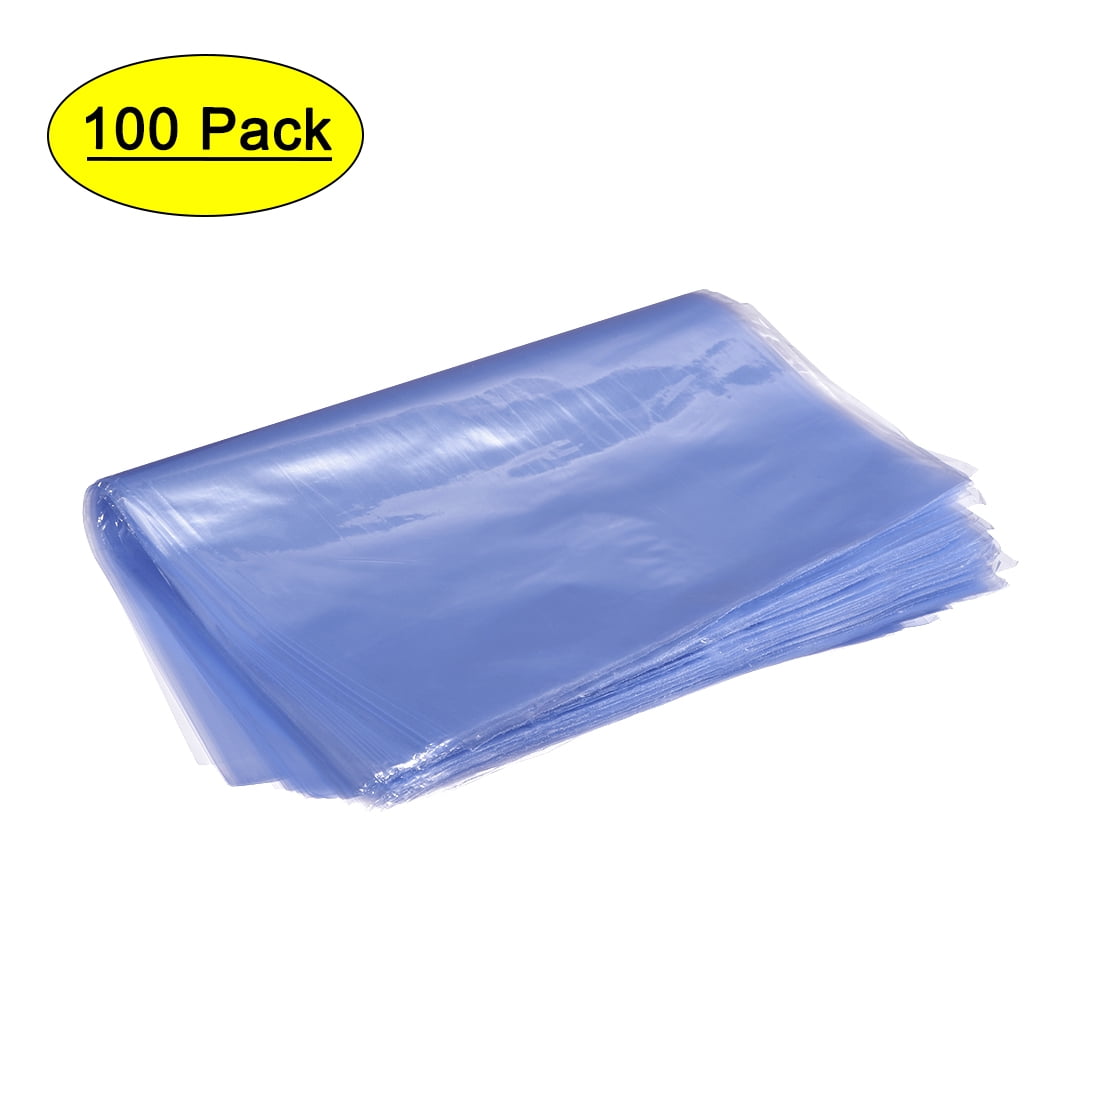 Heat Shrink Bag - Hoatai 12x18Professional Grade Heat Shrink Wrap is Used  to Store Wrap Embellished Items for Longer Life - Industrial Grade Shrink